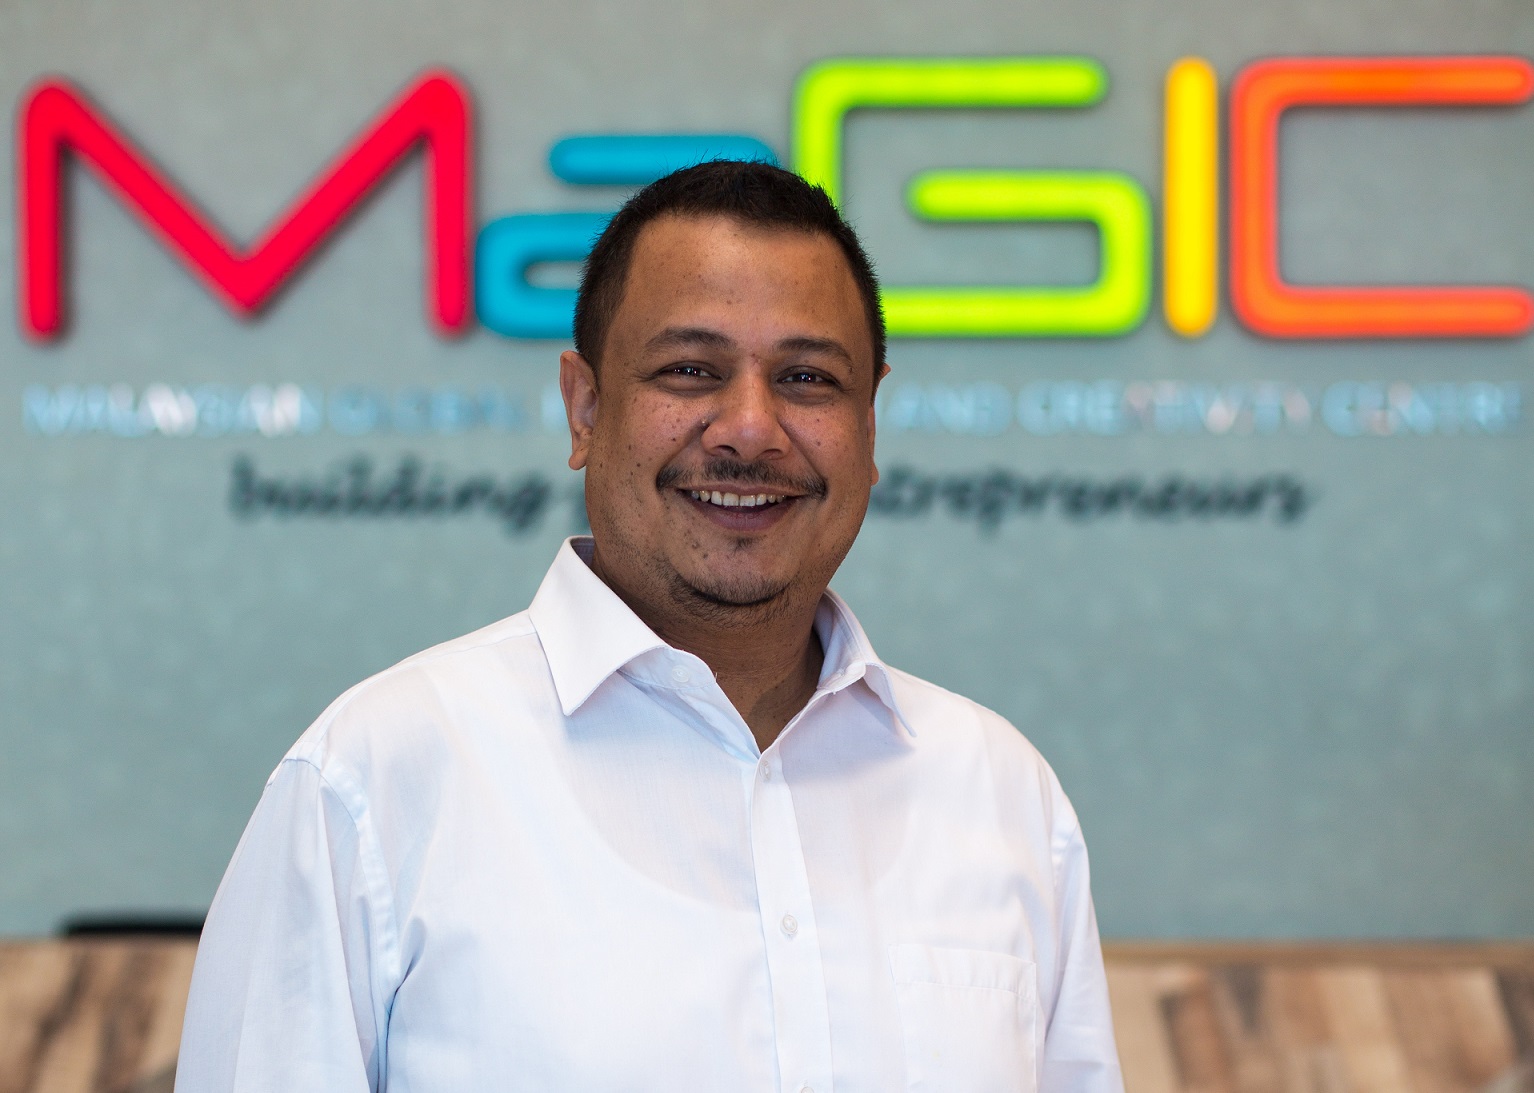 IBM collaborates with MaGIC to nurture and enable startups in Malaysia